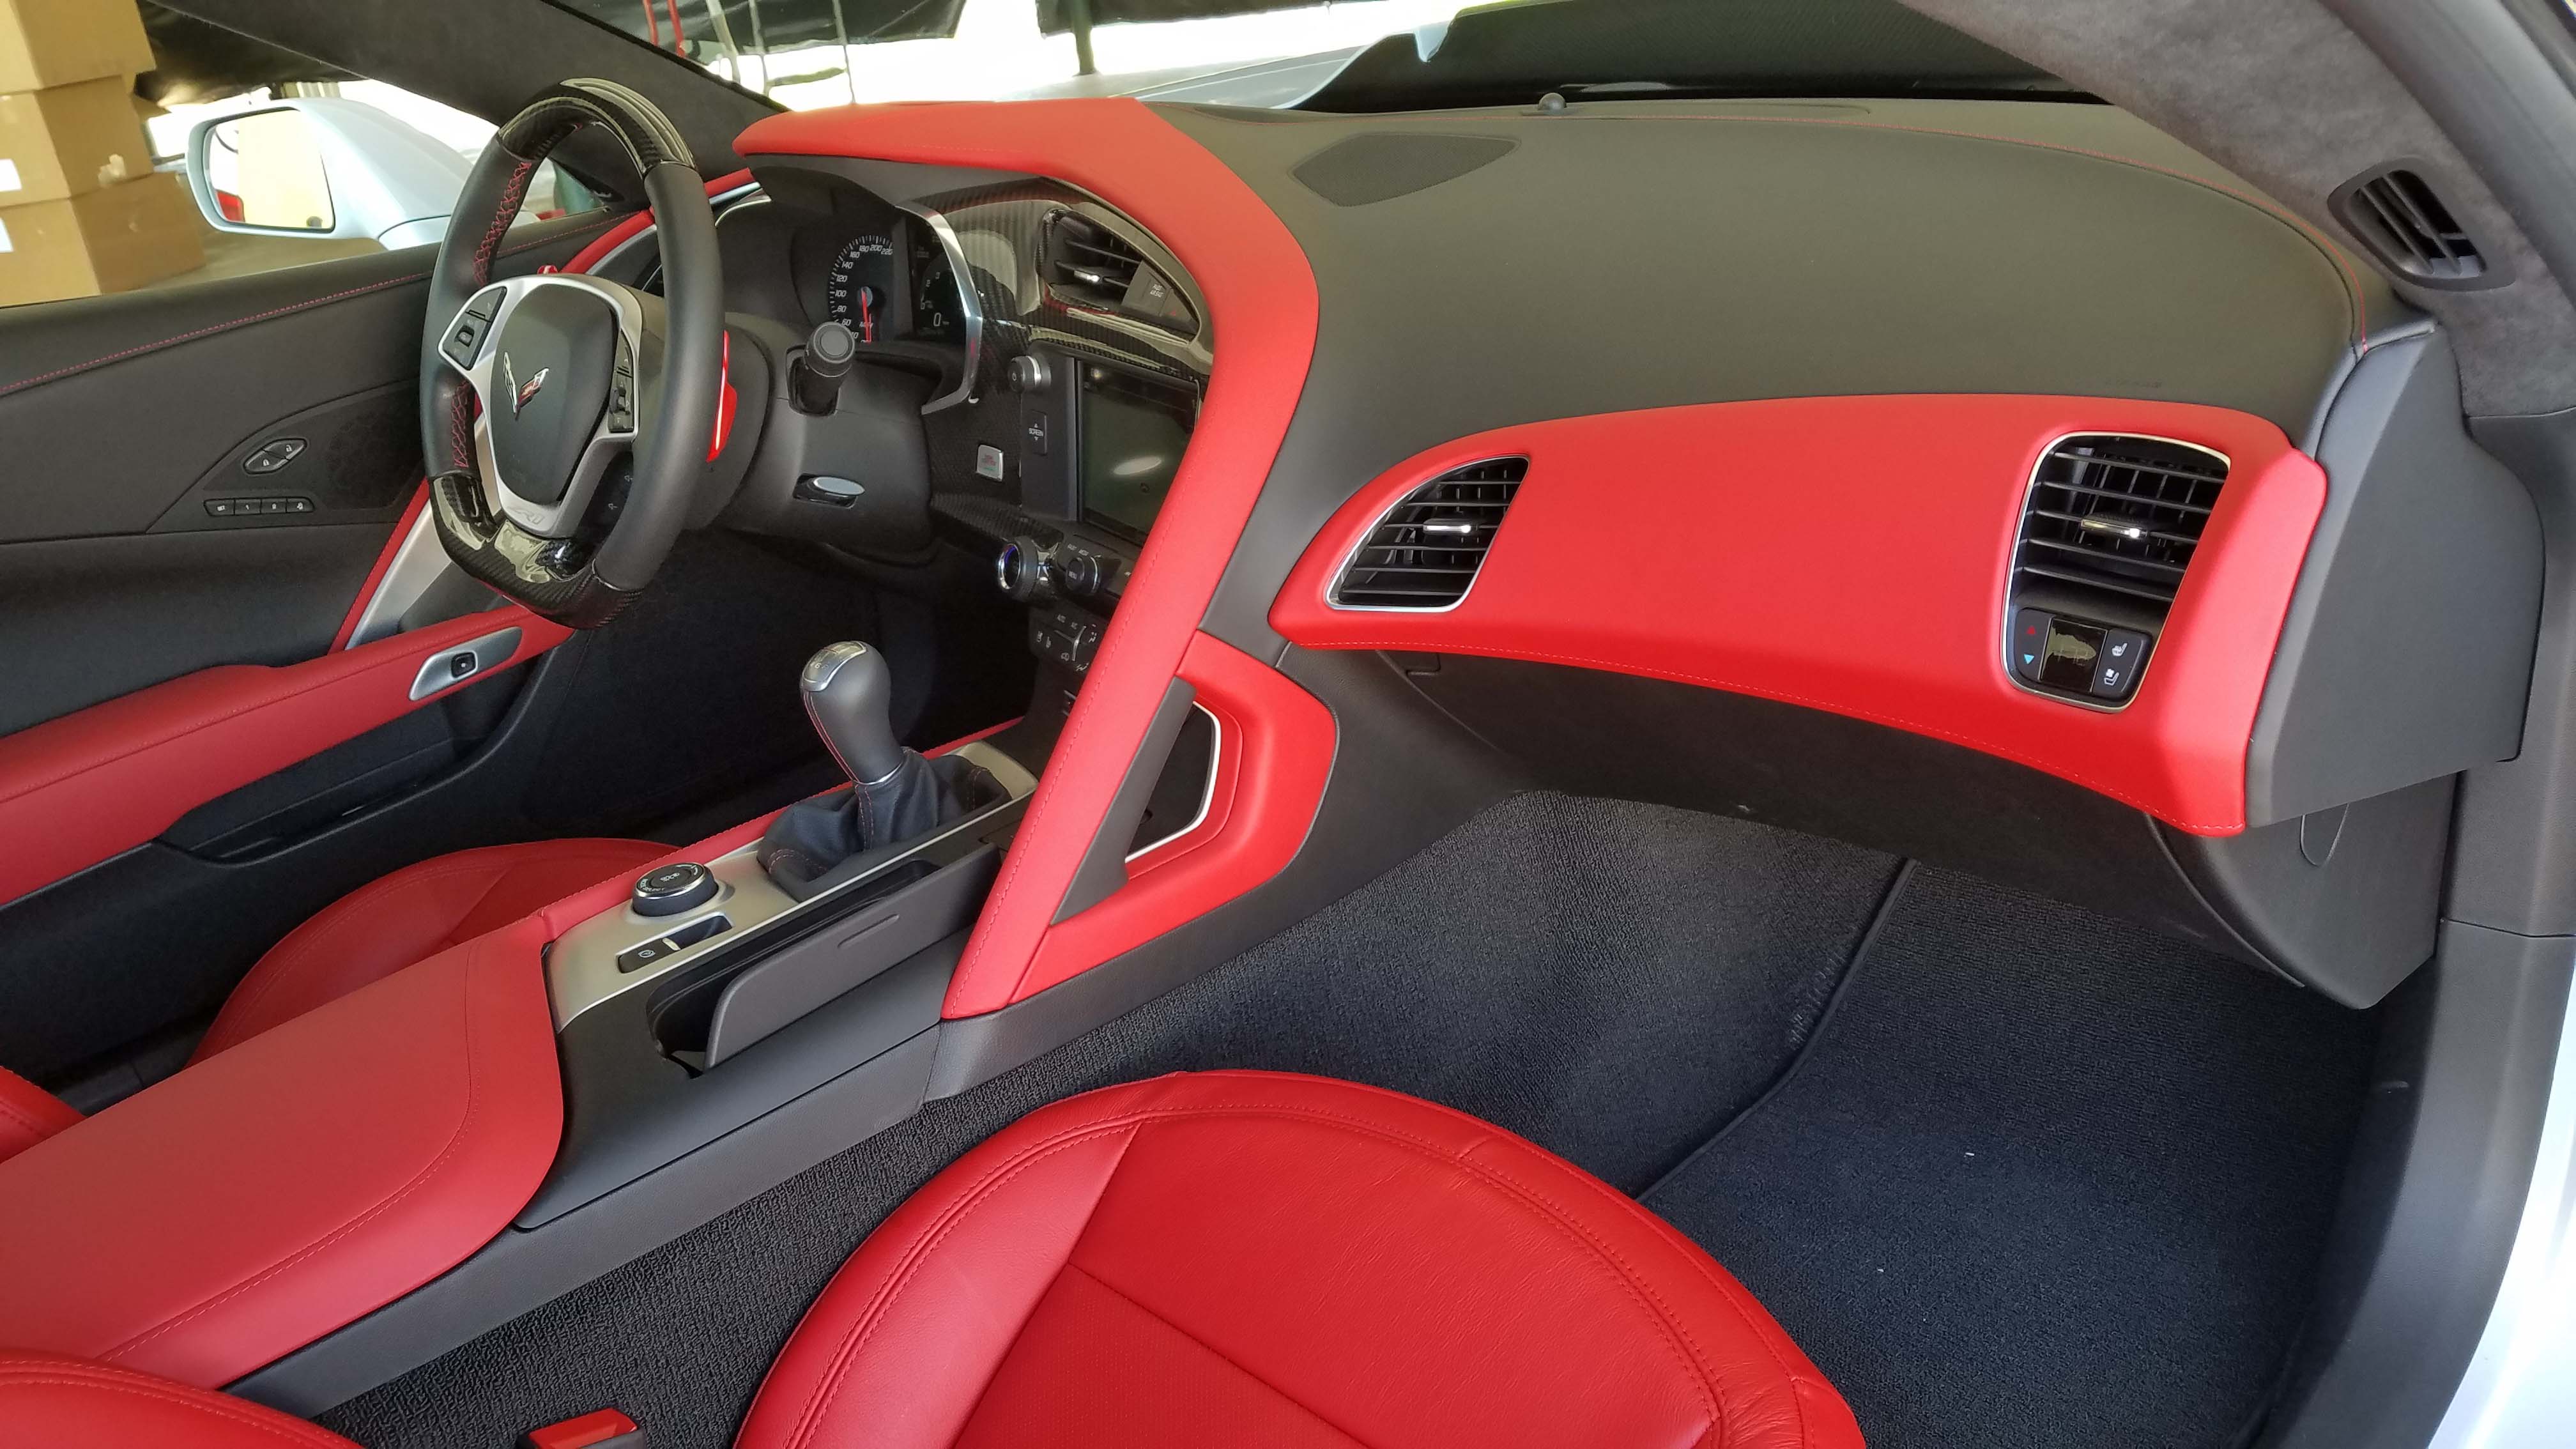 A ferocious monster on the outside, the Corvette ZR1 offers luxurious living on the inside with leather seats, Wi-Fi, smartphone connectivity and other swish amenities. It comes in red, too.